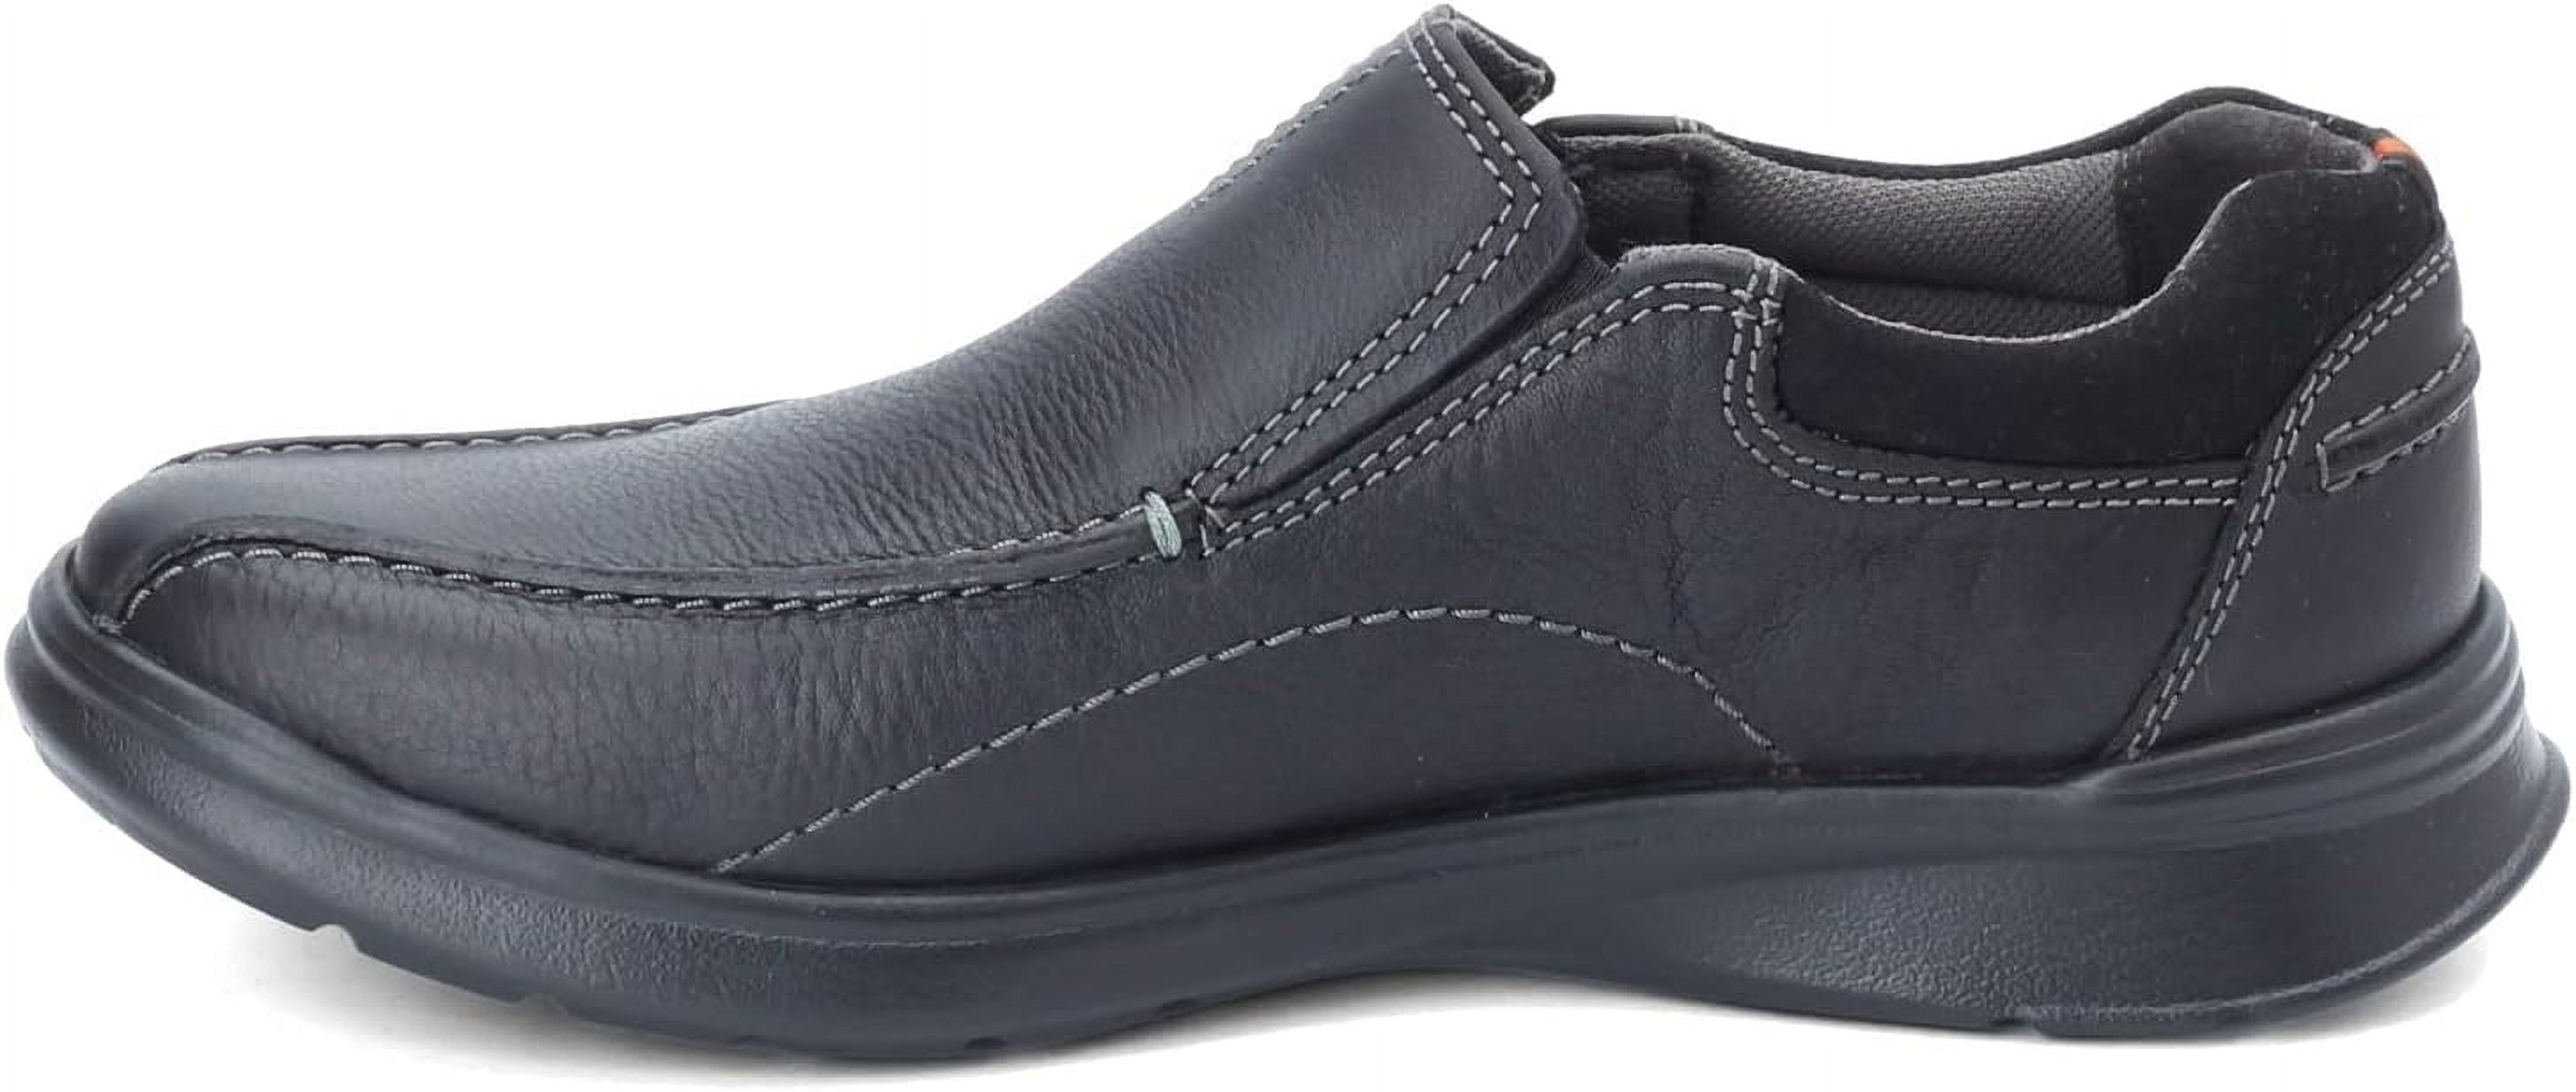 Men's Cotrell Step Bicycle Toe Shoe - image 1 of 7